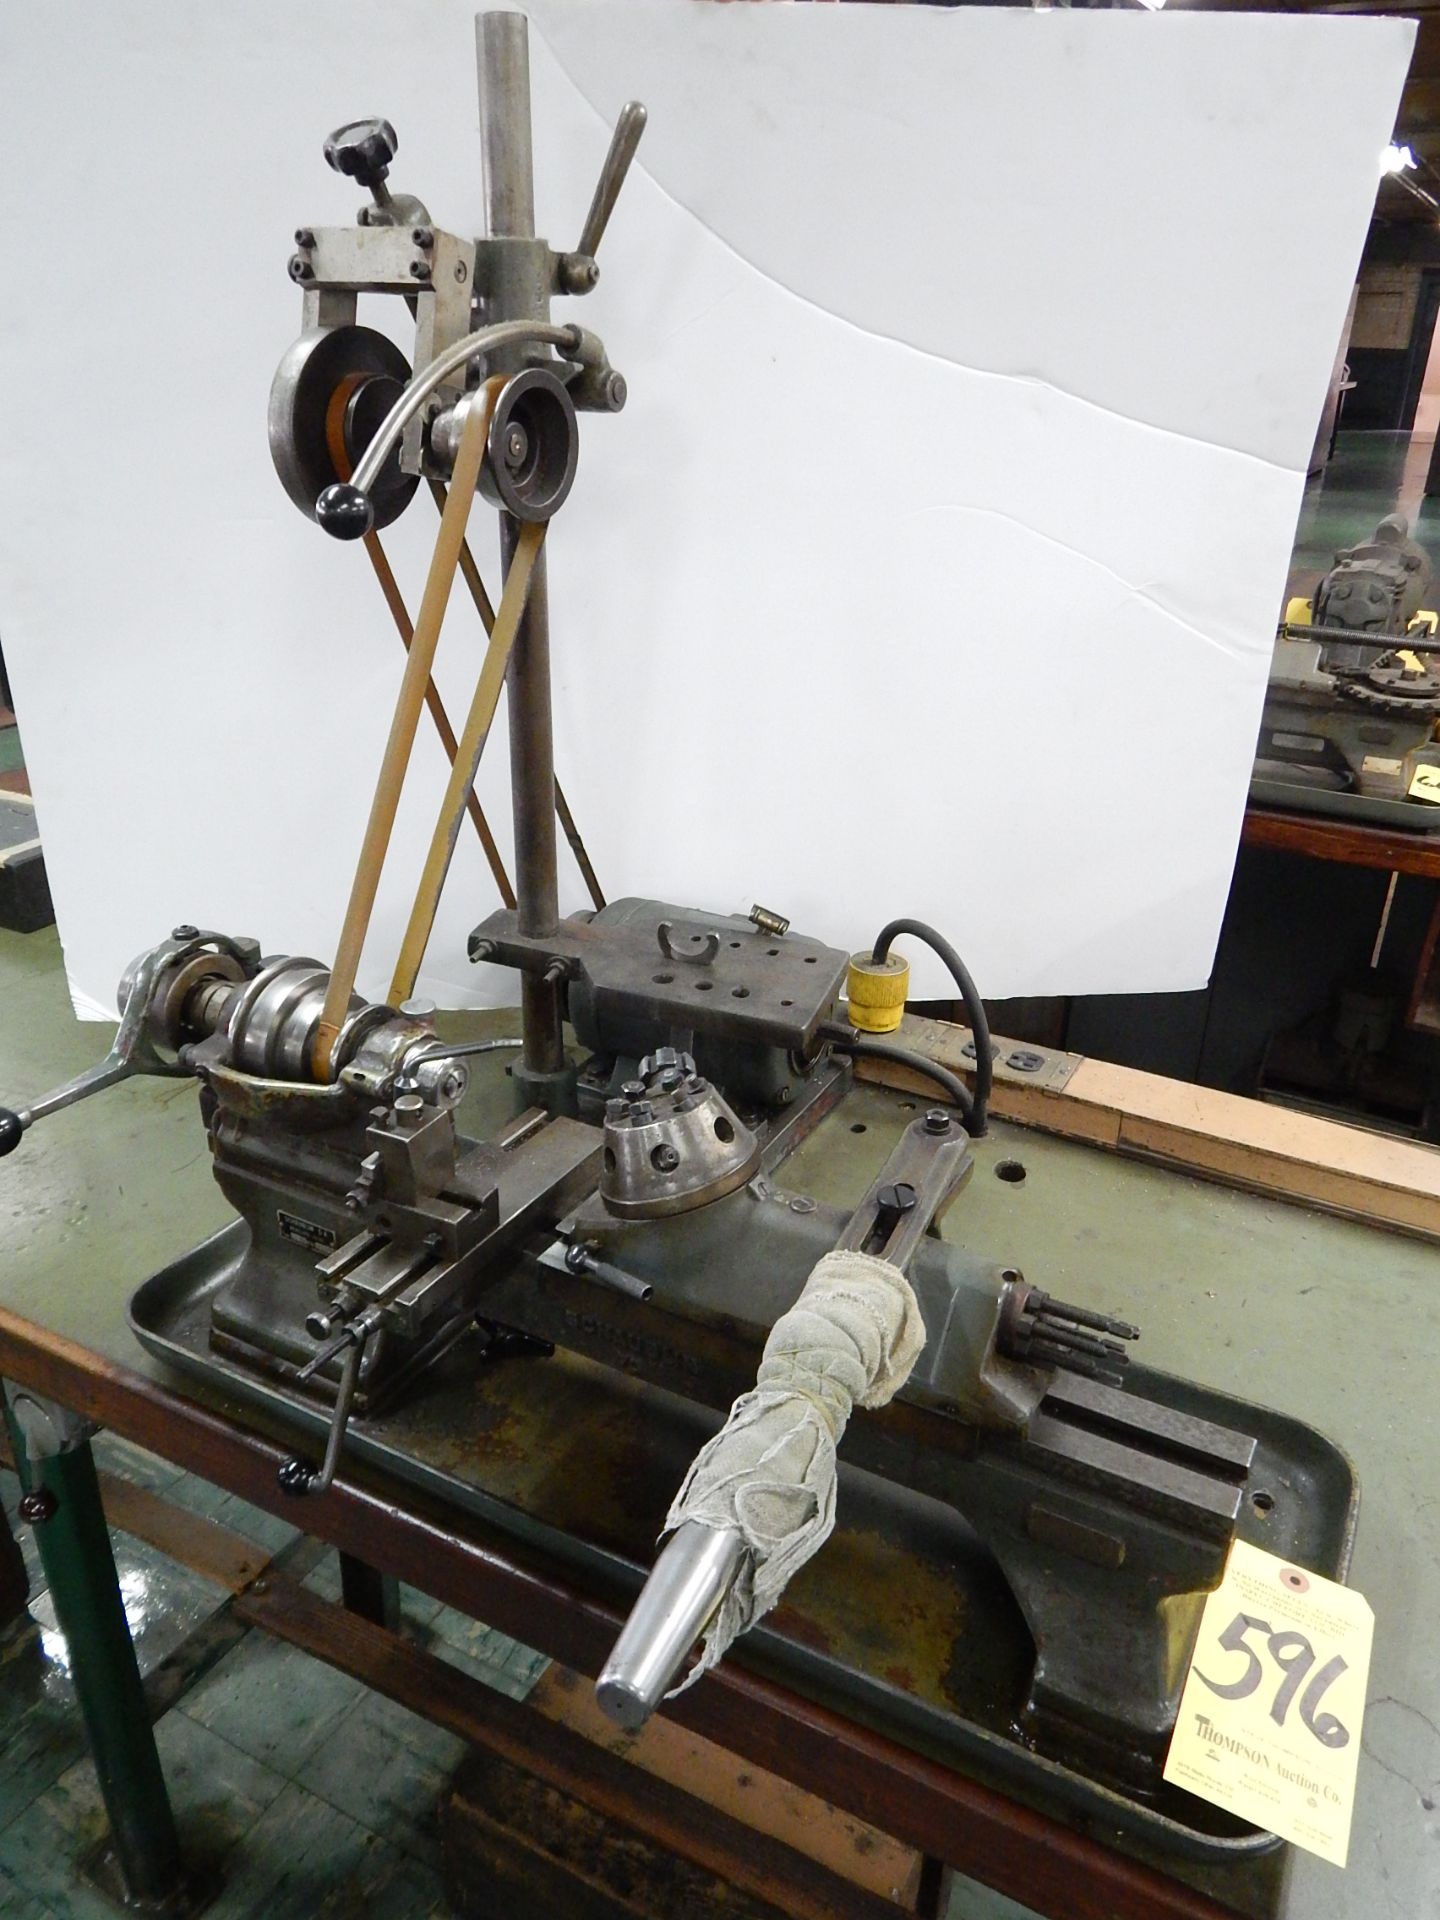 Schaublin Model 70 Jeweler's Lathe with Bed Turret